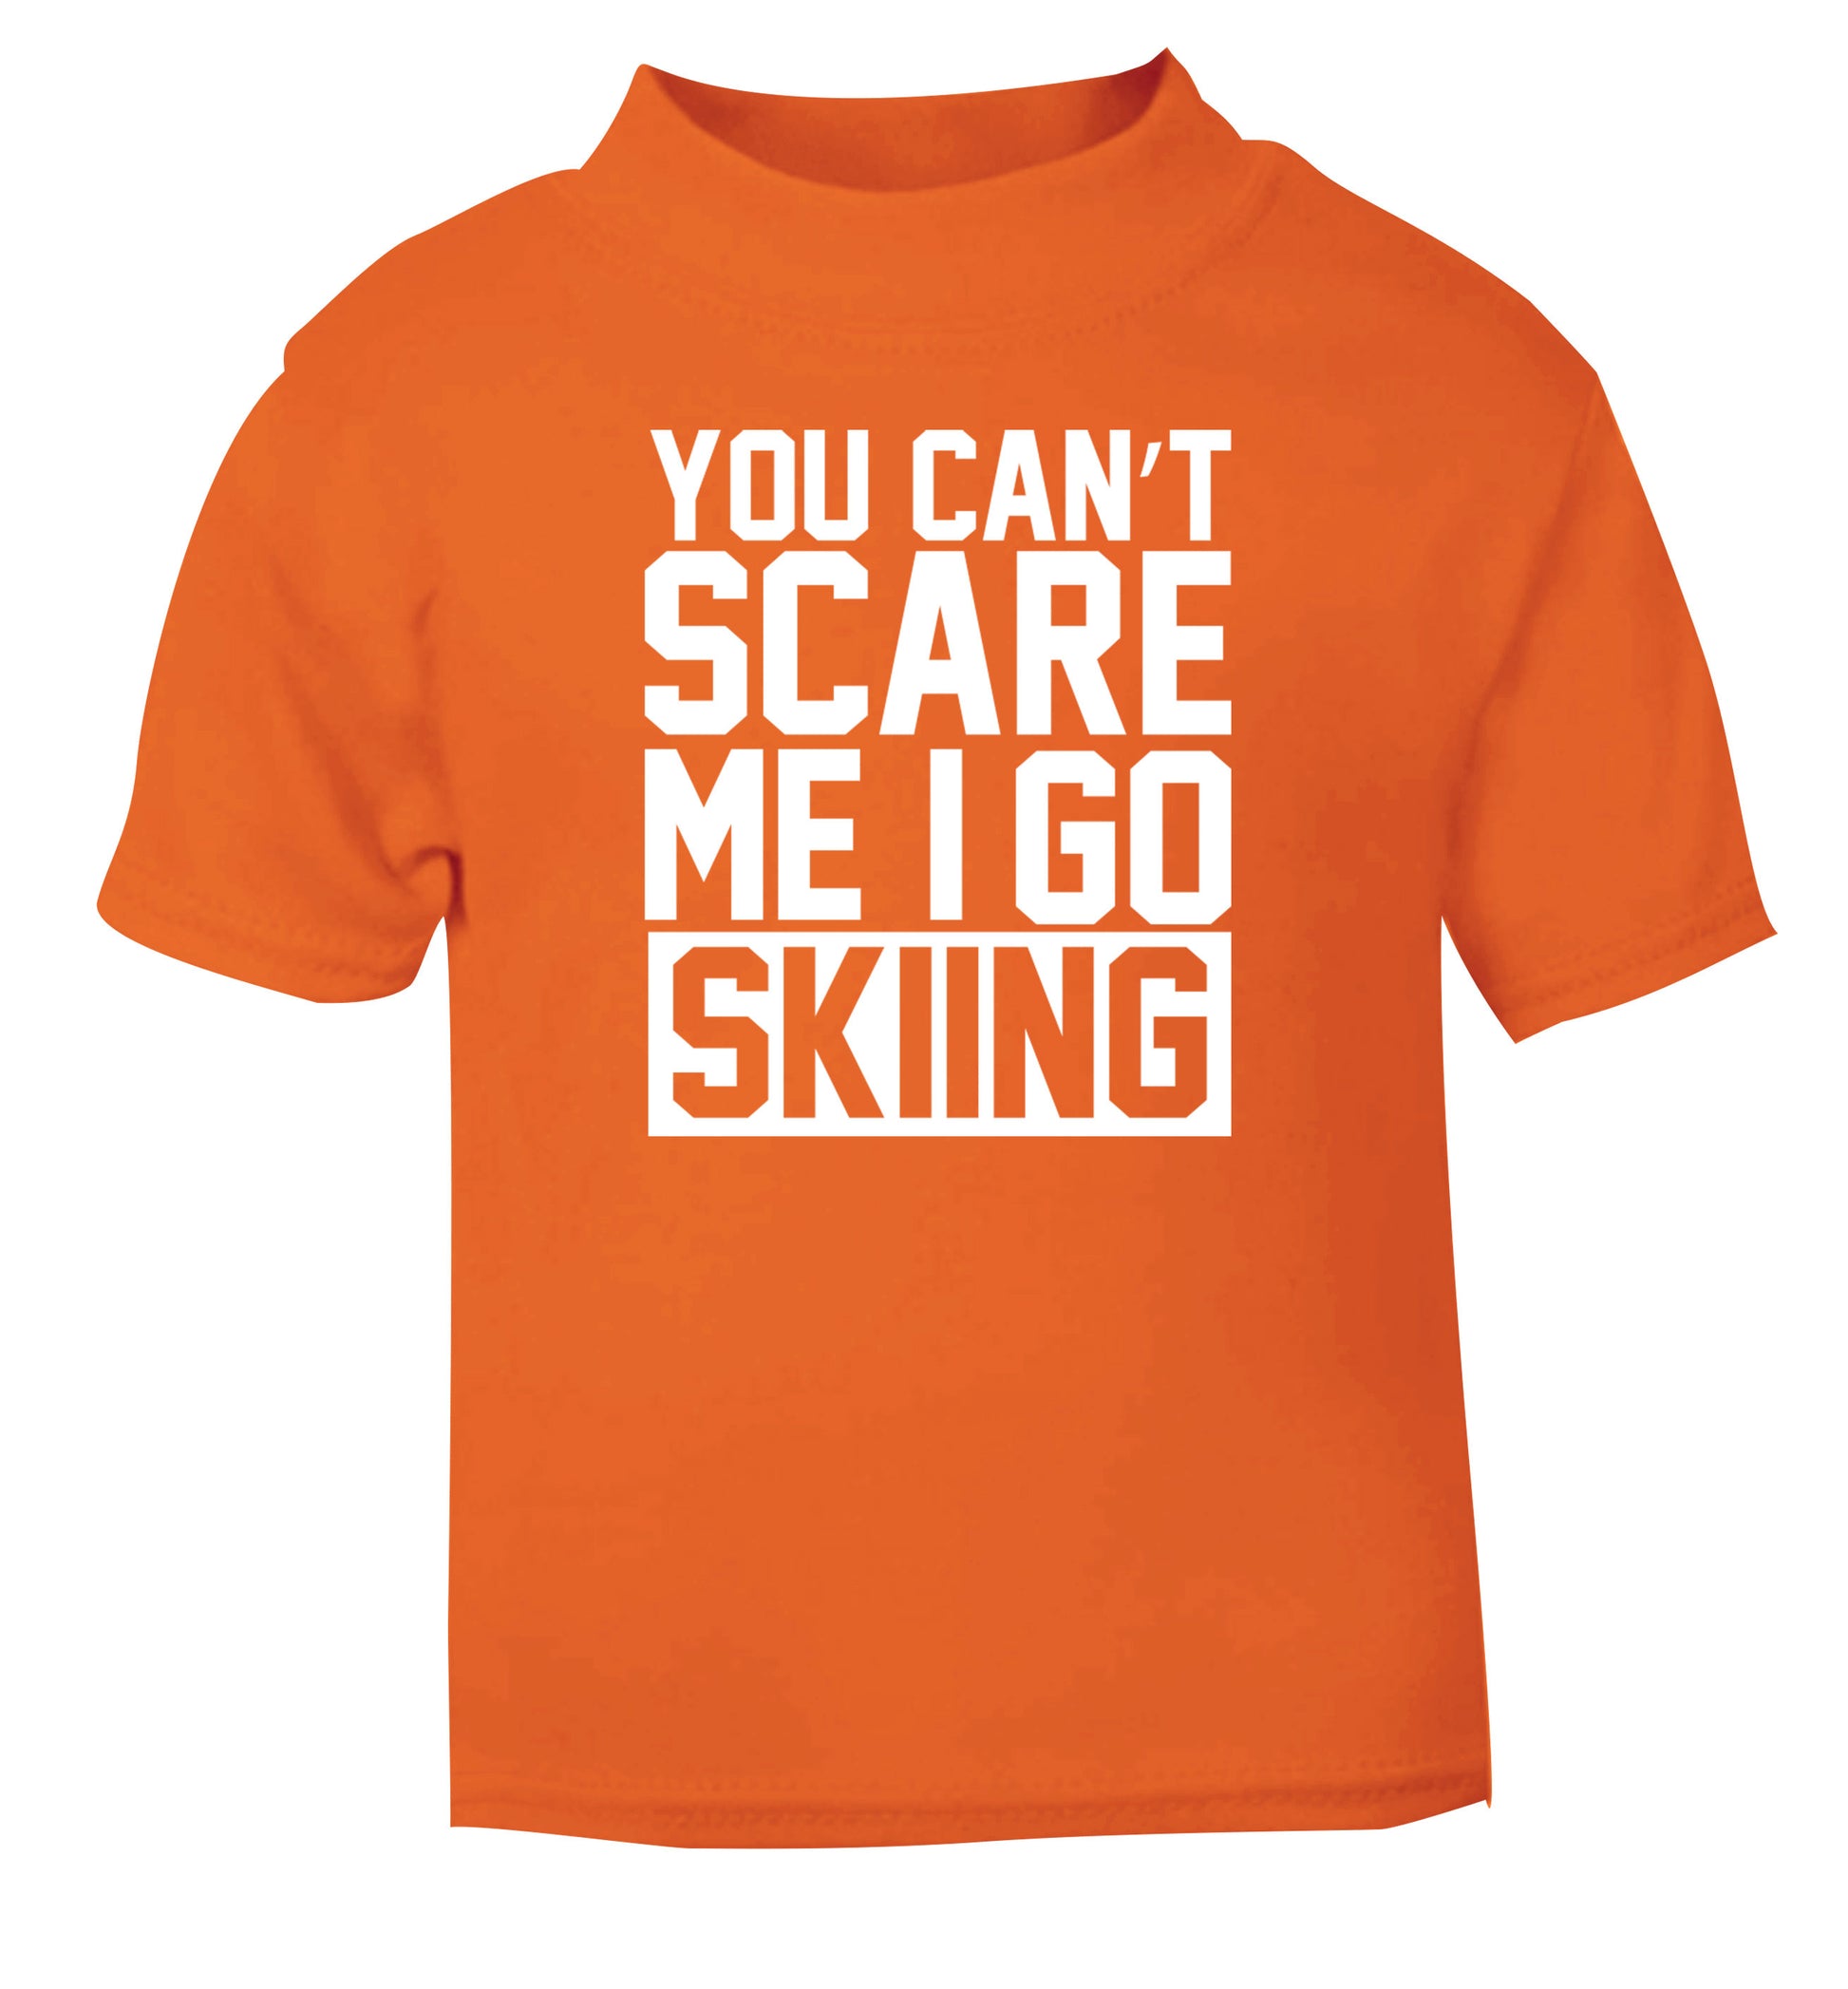 You can't scare me I go skiing orange Baby Toddler Tshirt 2 Years